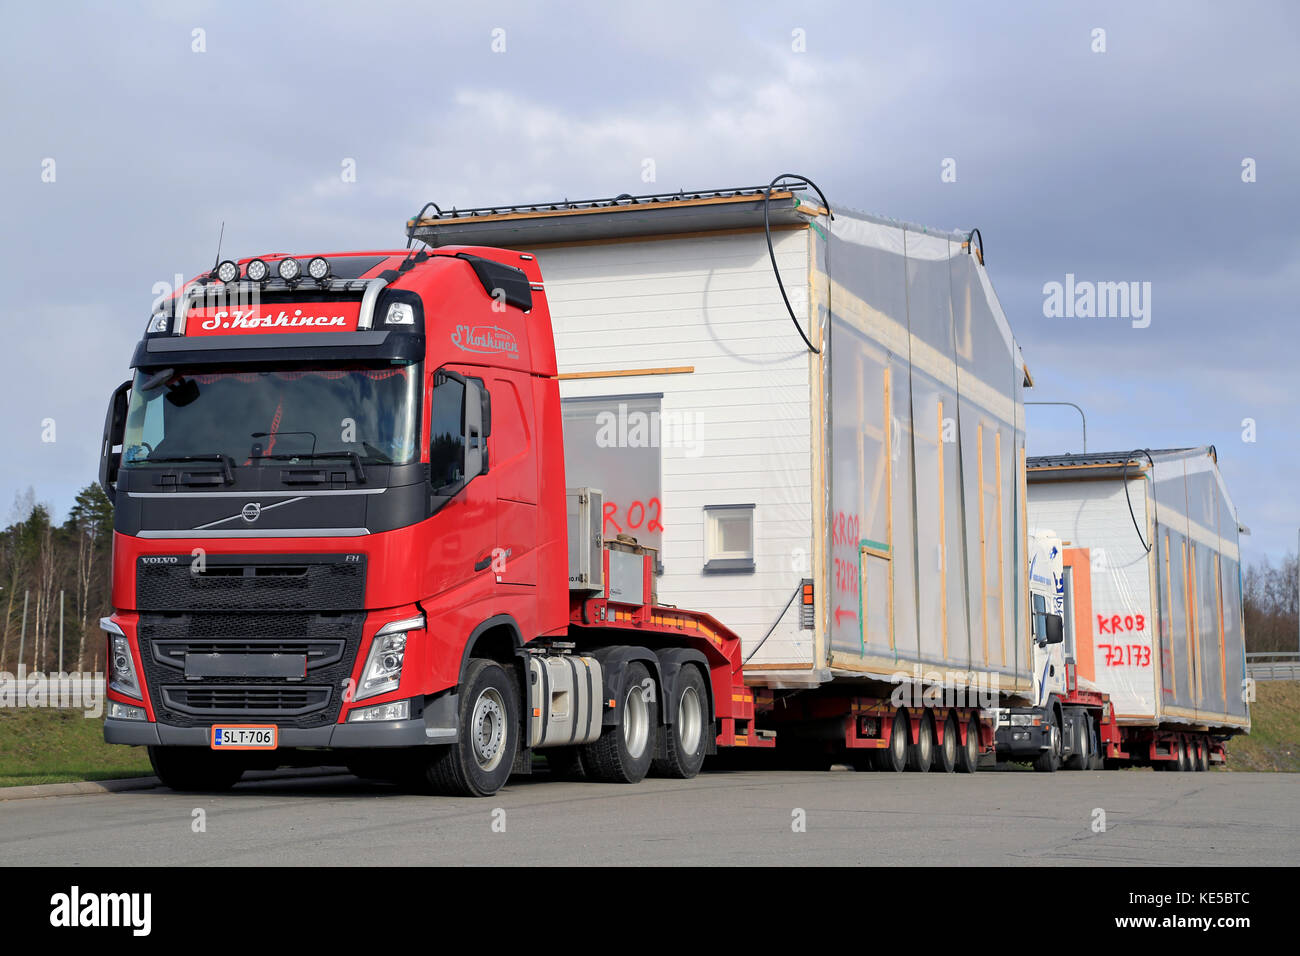 FORSSA, FINLAND - APRIL 23, 2016: Volvo FH semi and another truck are ready to transport prefabricated house modules as oversize loads in South of Fin Stock Photo